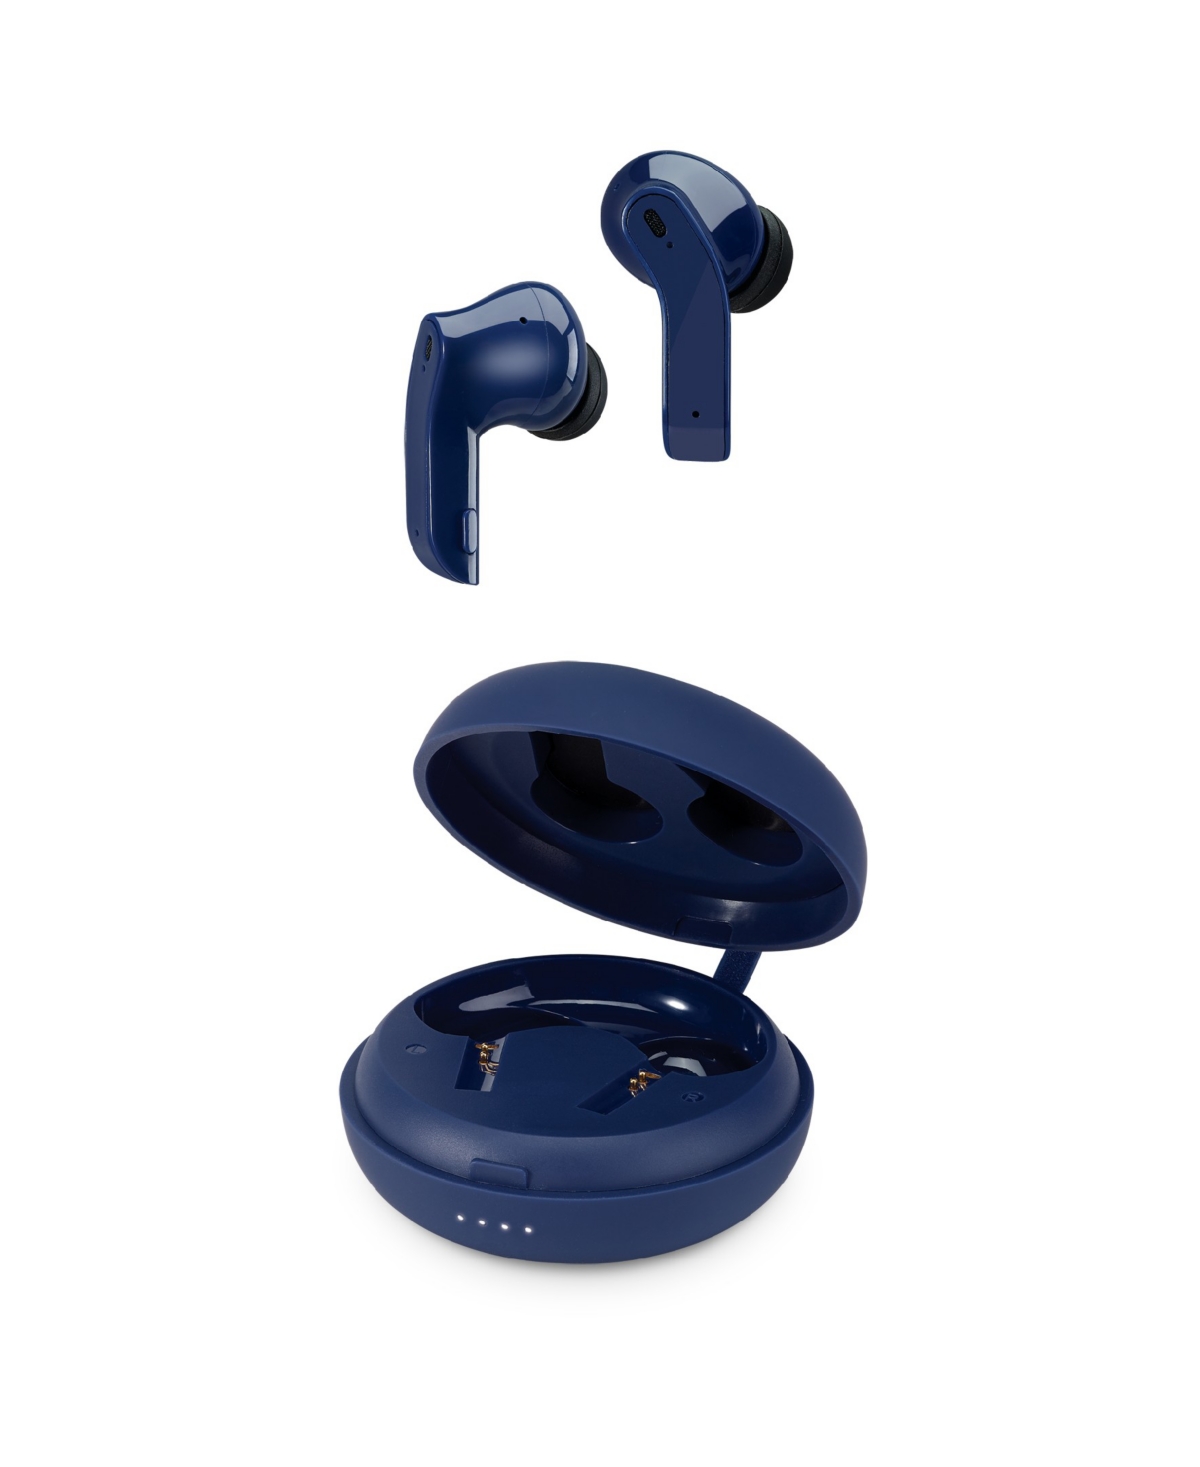 Ilive Truly Wireless Earbuds With Active Noise Canceling, Iaebt600ind In Indigo